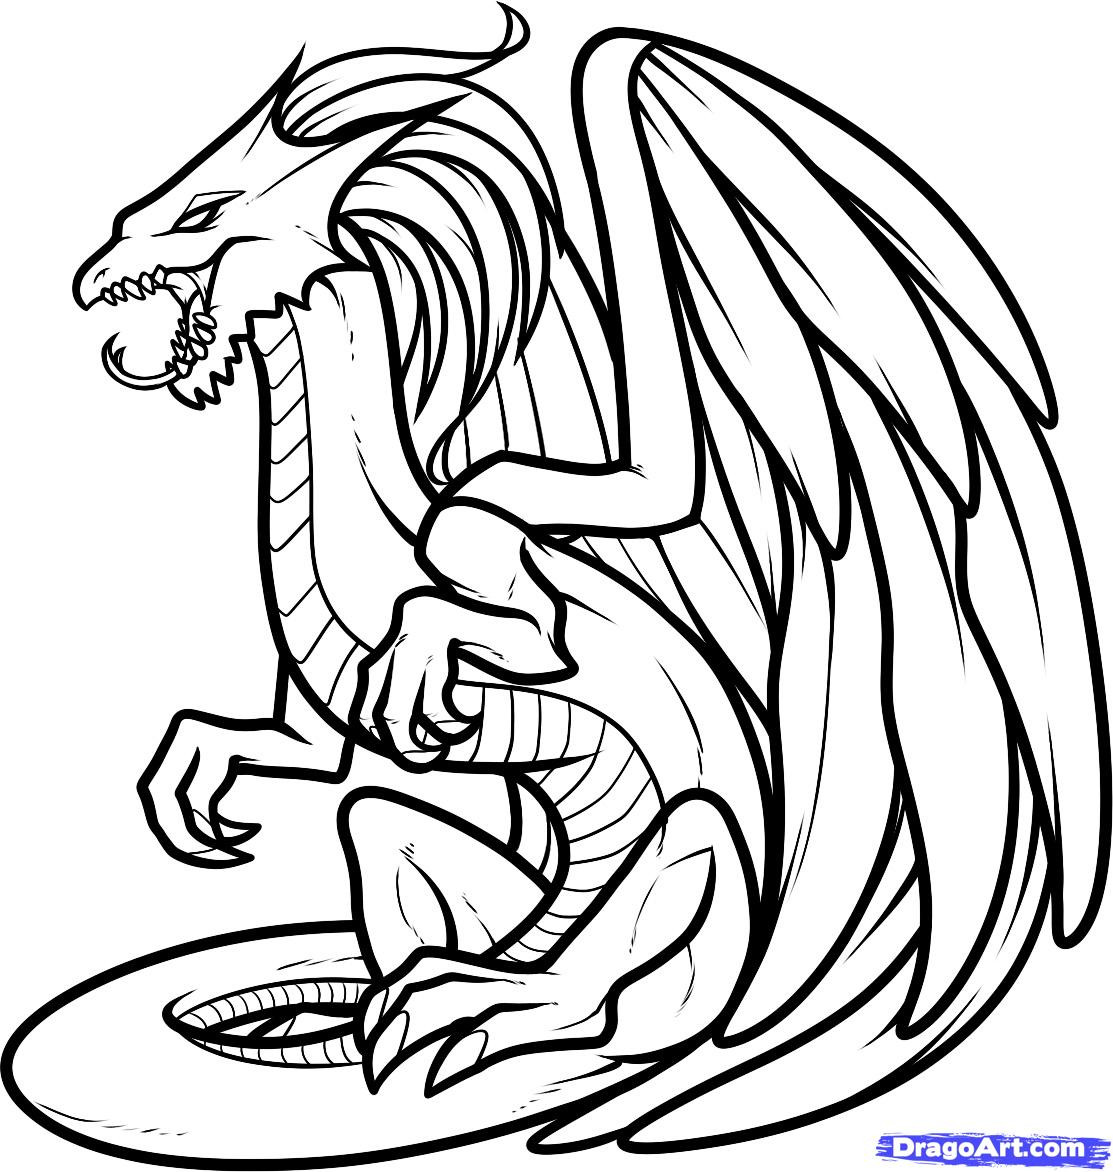 Dork Diaries Coloring Pages Fresh Coloring Pages Real - Dragon Black White Coloring , HD Wallpaper & Backgrounds